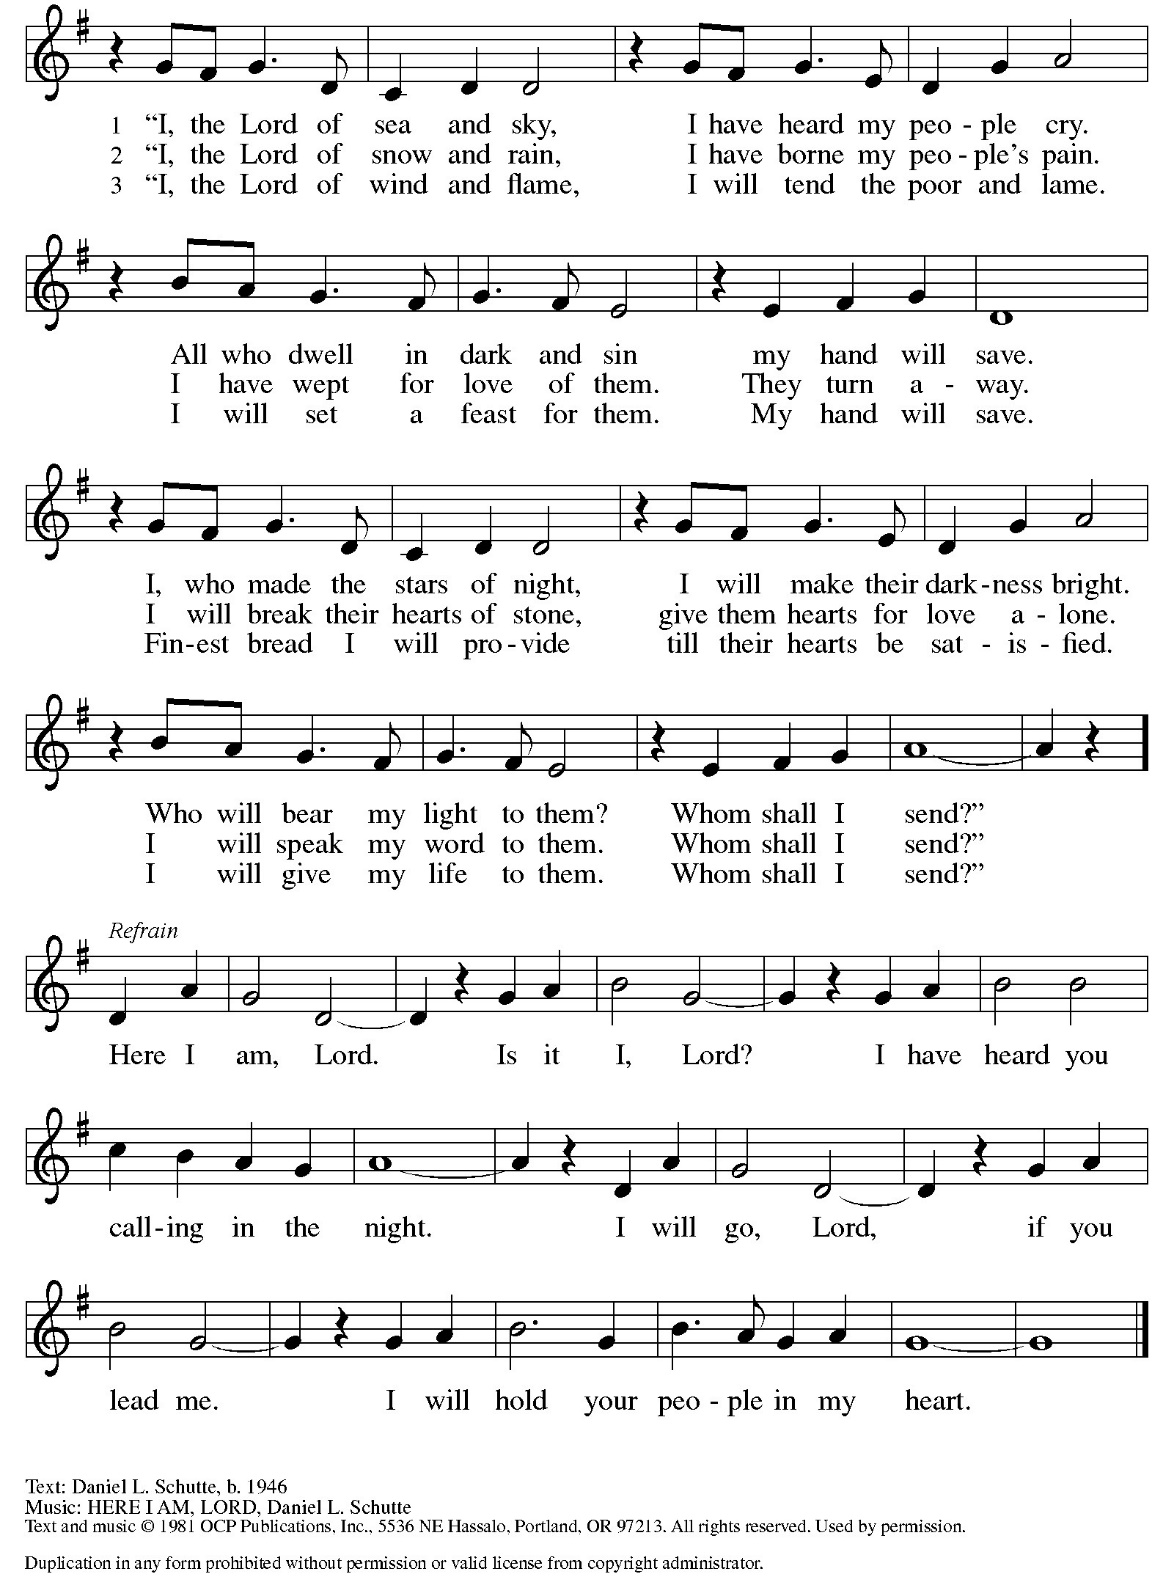 A sheet music with text Description automatically generated